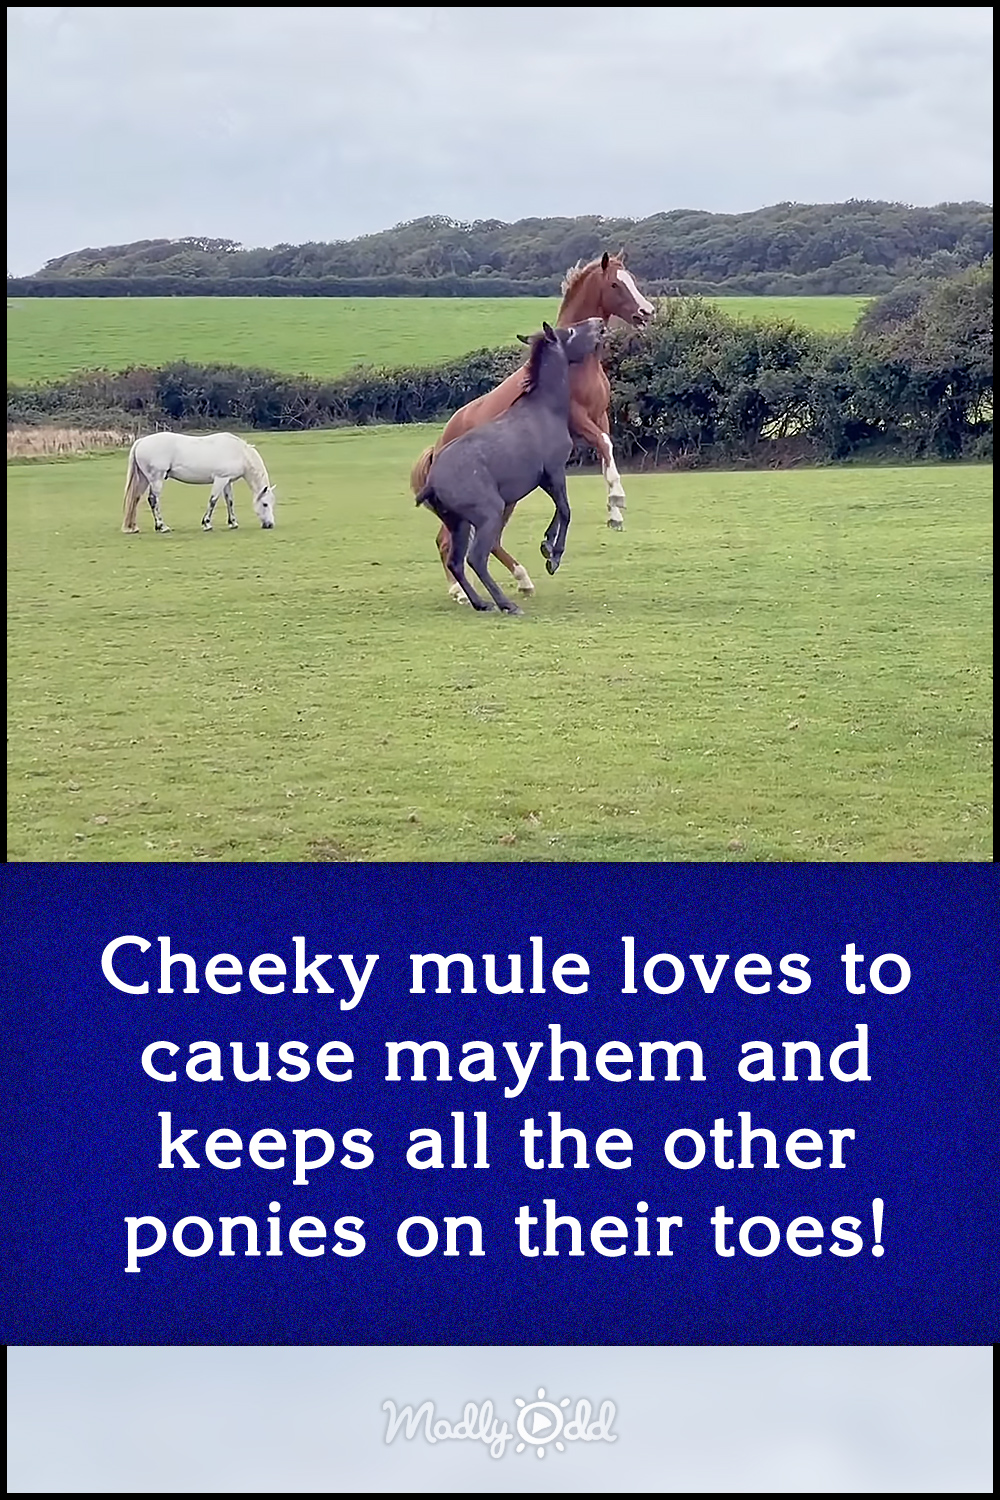 Cheeky mule loves to cause mayhem and keeps all the other ponies on their toes!